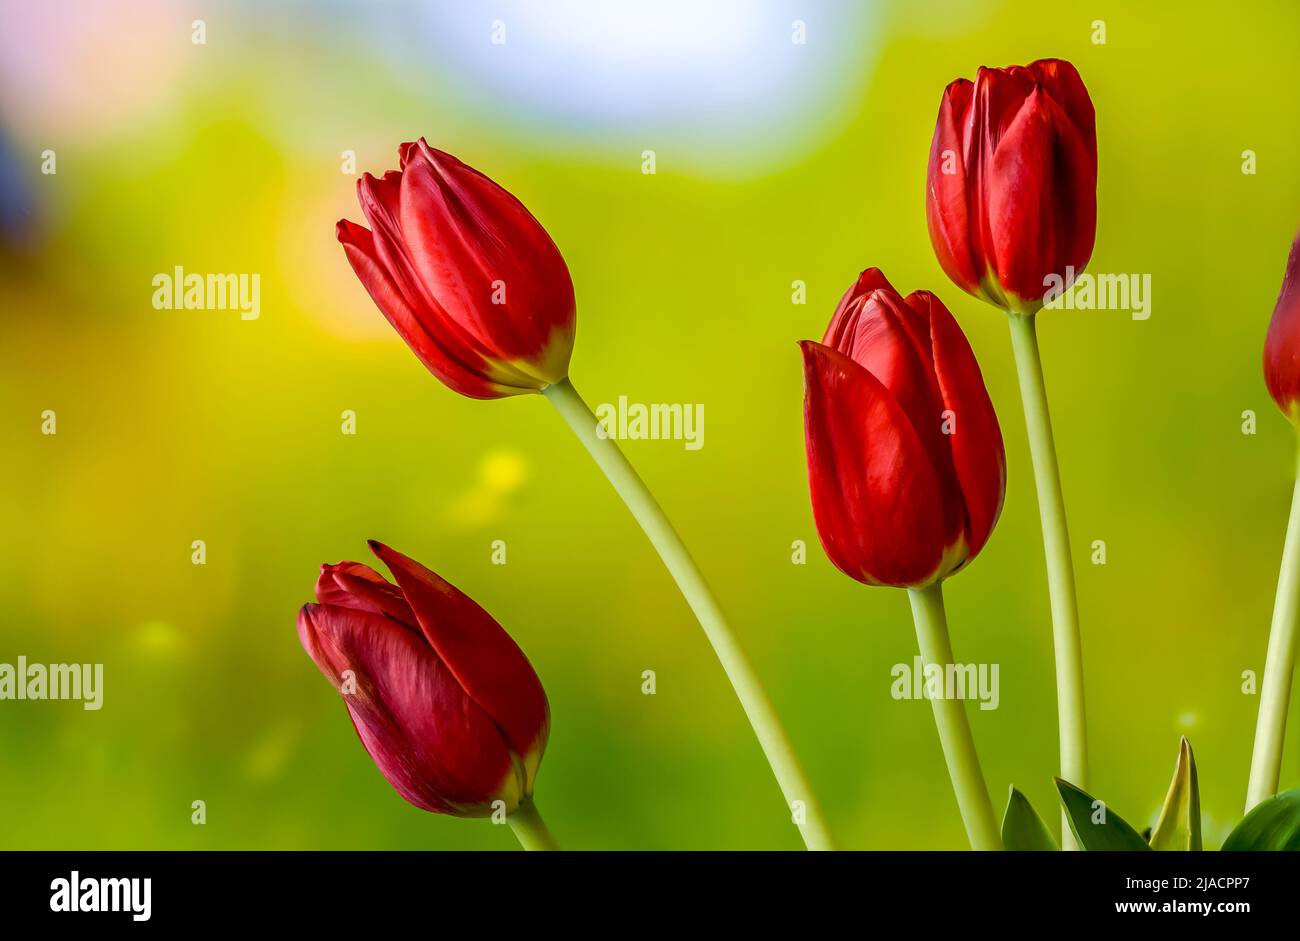 red tulips on a soft blurred background at close range Stock Photo